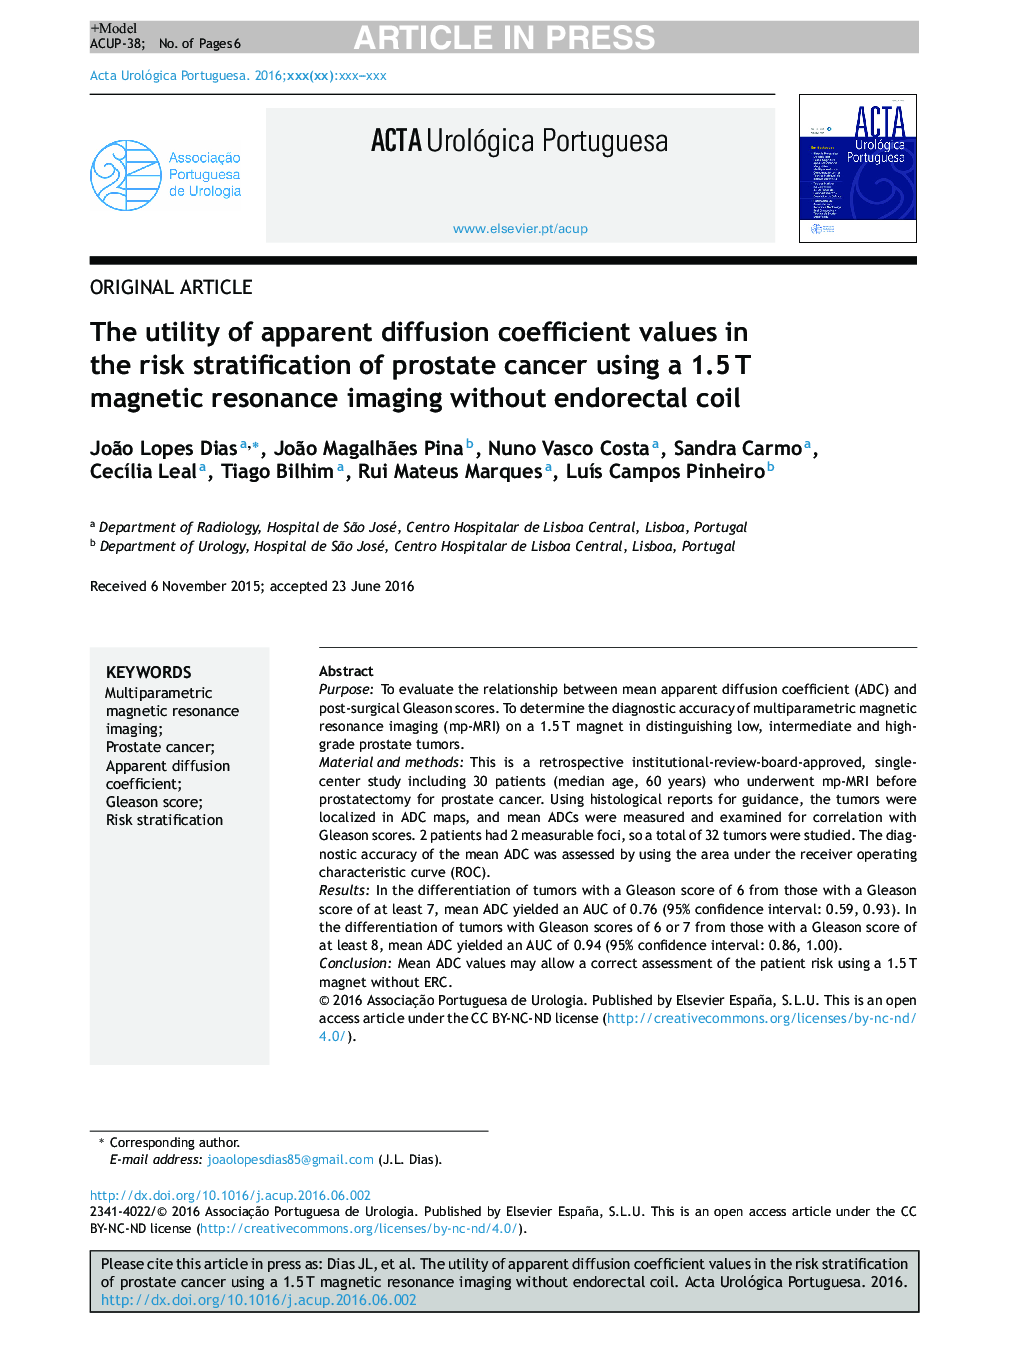 The utility of apparent diffusion coefficient values in the risk stratification of prostate cancer using a 1.5Â T magnetic resonance imaging without endorectal coil